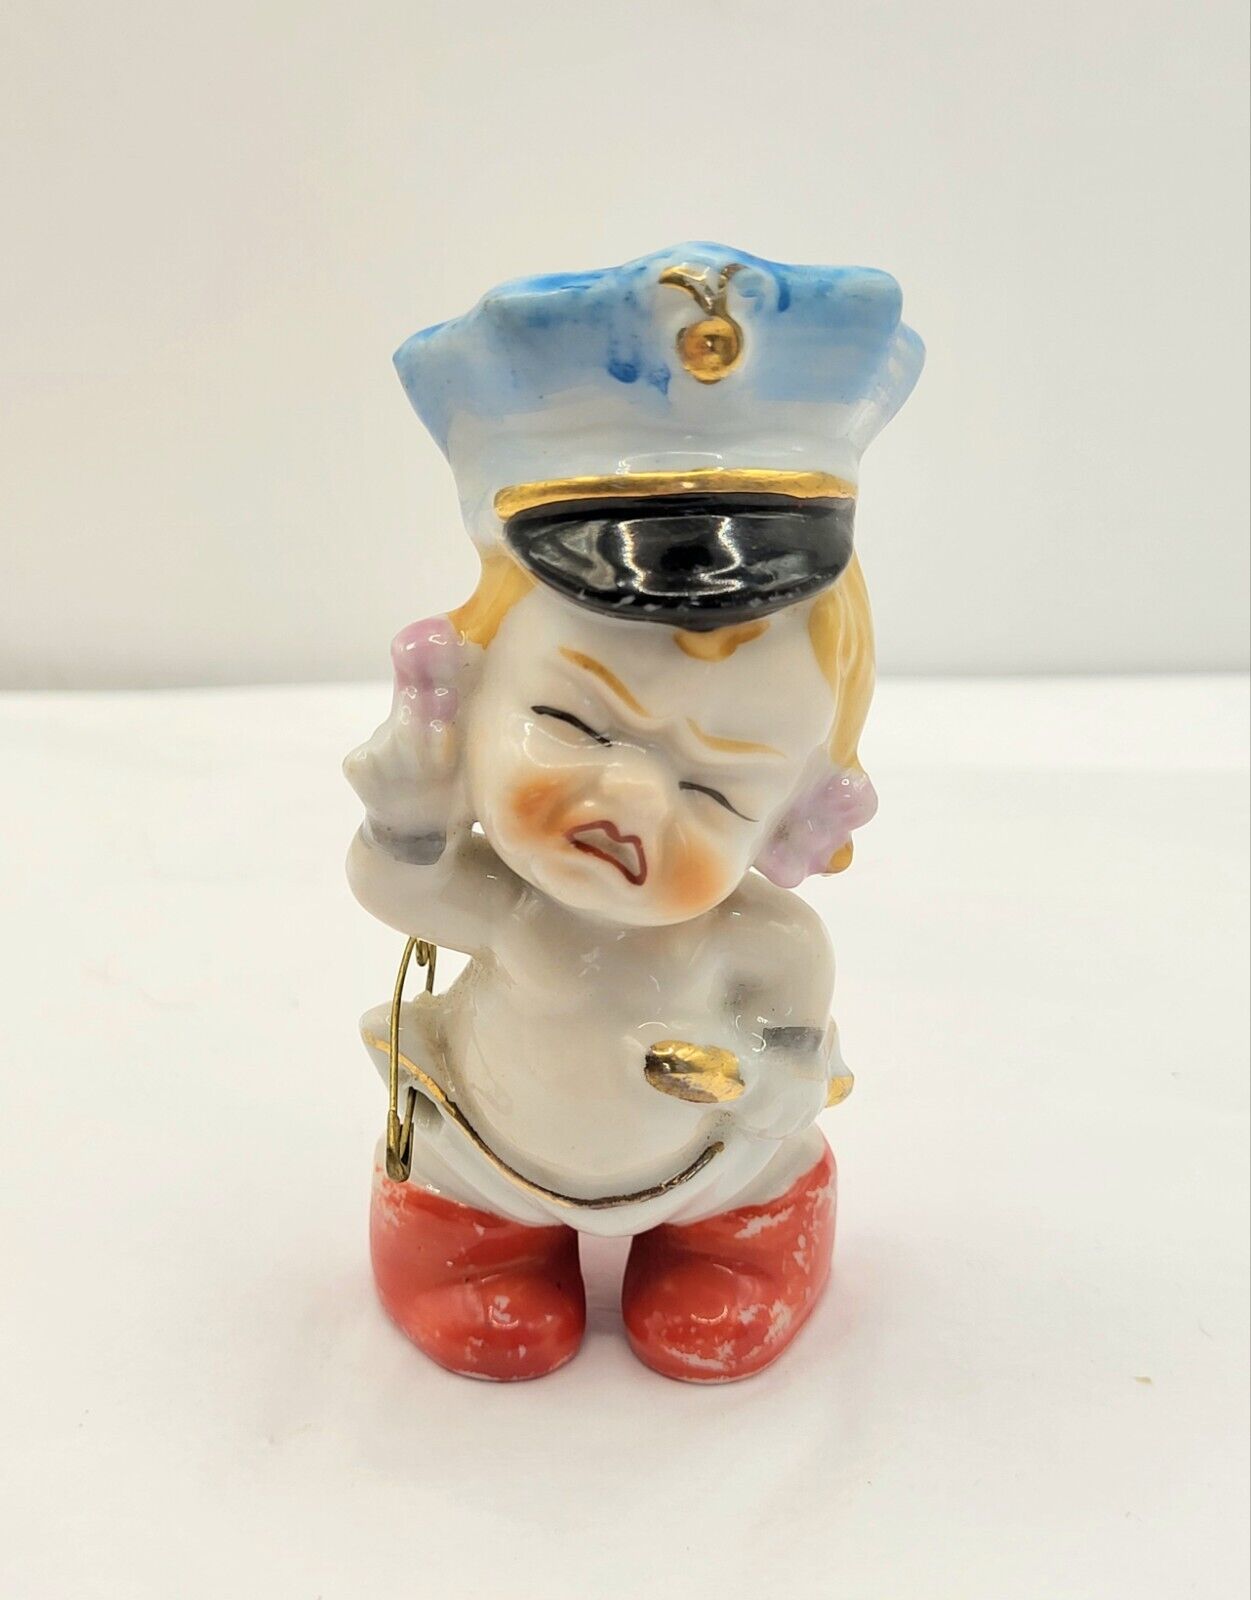 Vintage Figurine Safety Pin Diaper Baby Crying Blonde Police Hat JAPAN  1950s